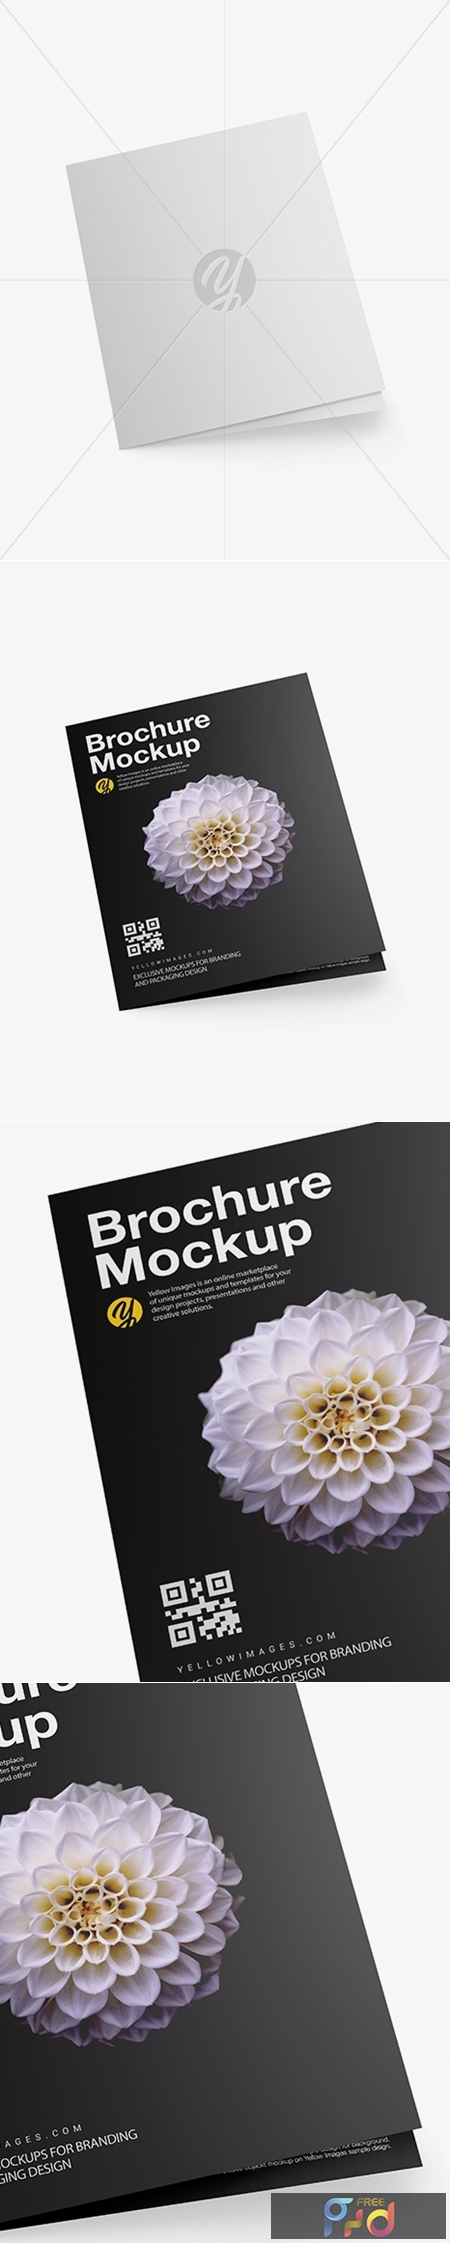 Download Download Magazine Mockup Psd Free Download Yellowimages PSD Mockup Templates